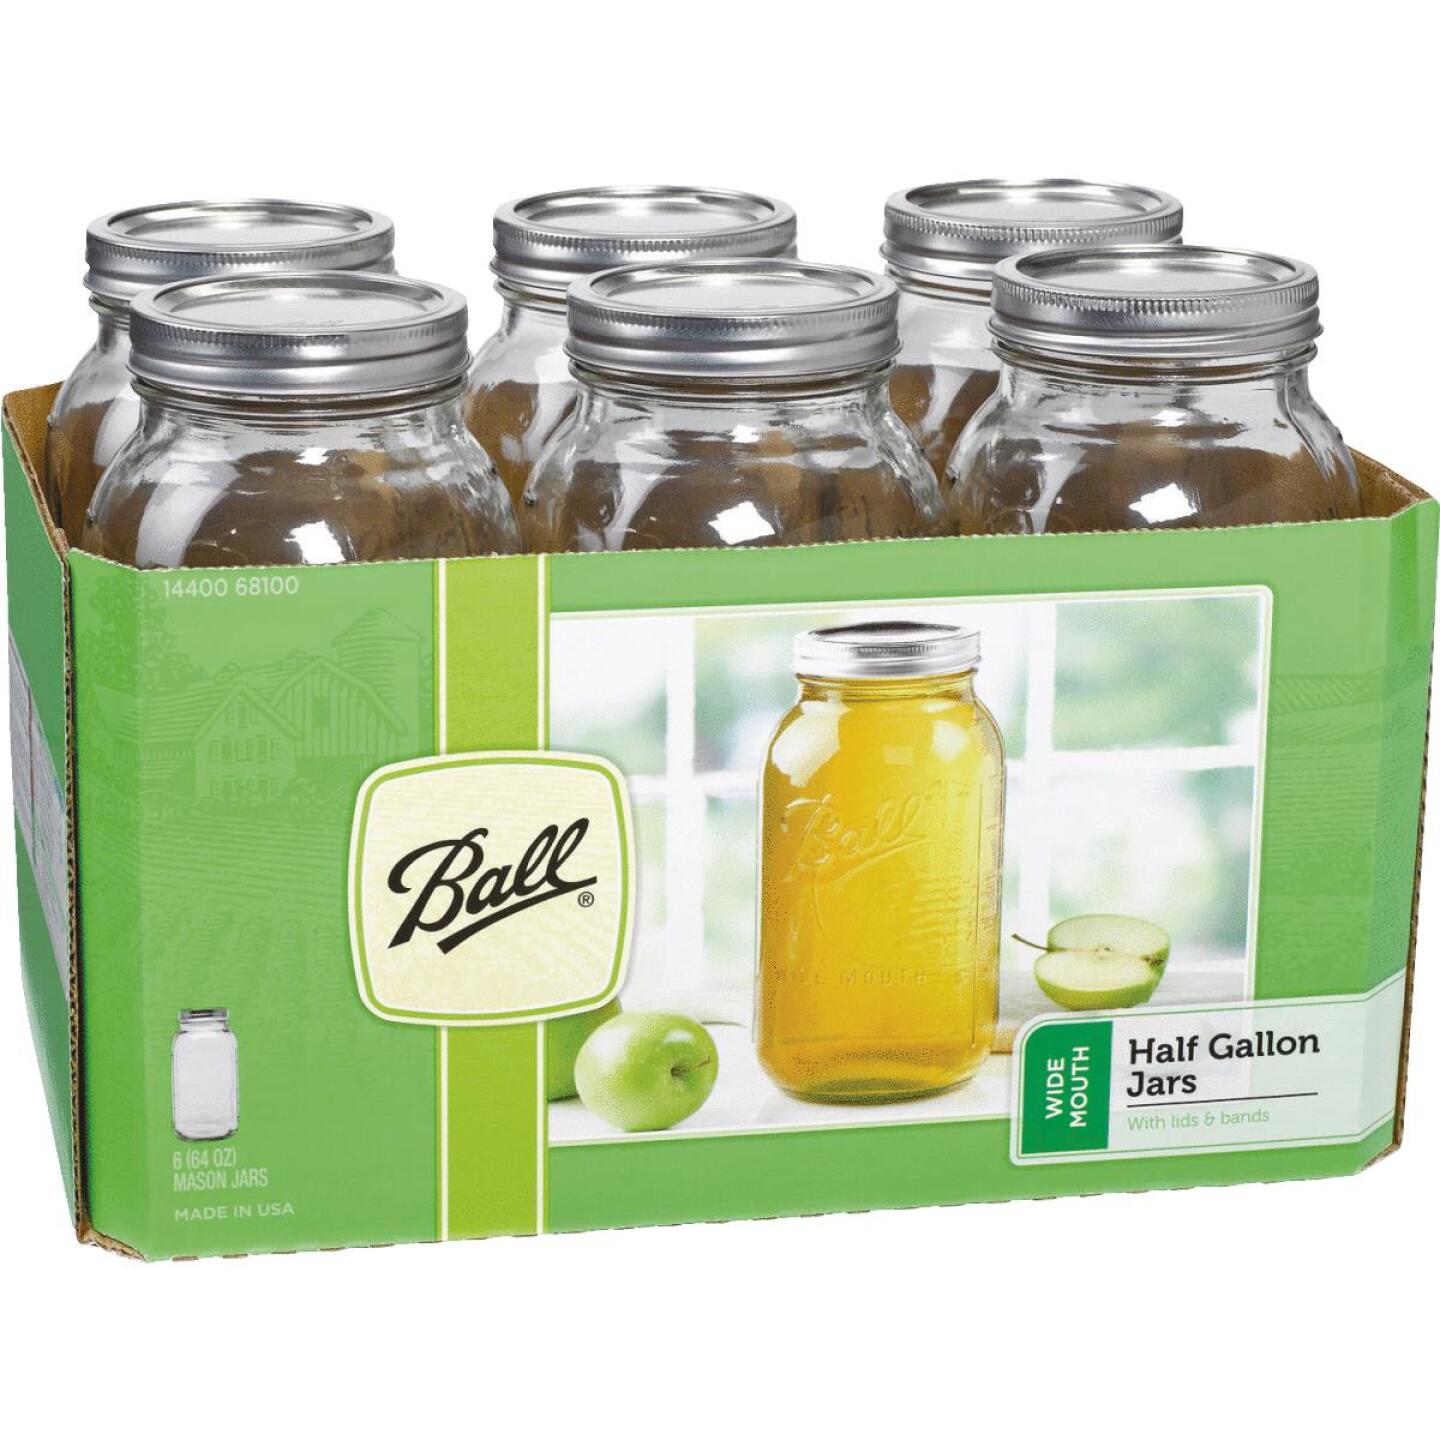 Ball, Ball 1/2 Gal. Wide Mouth Mason Canning Jar (6-Count)